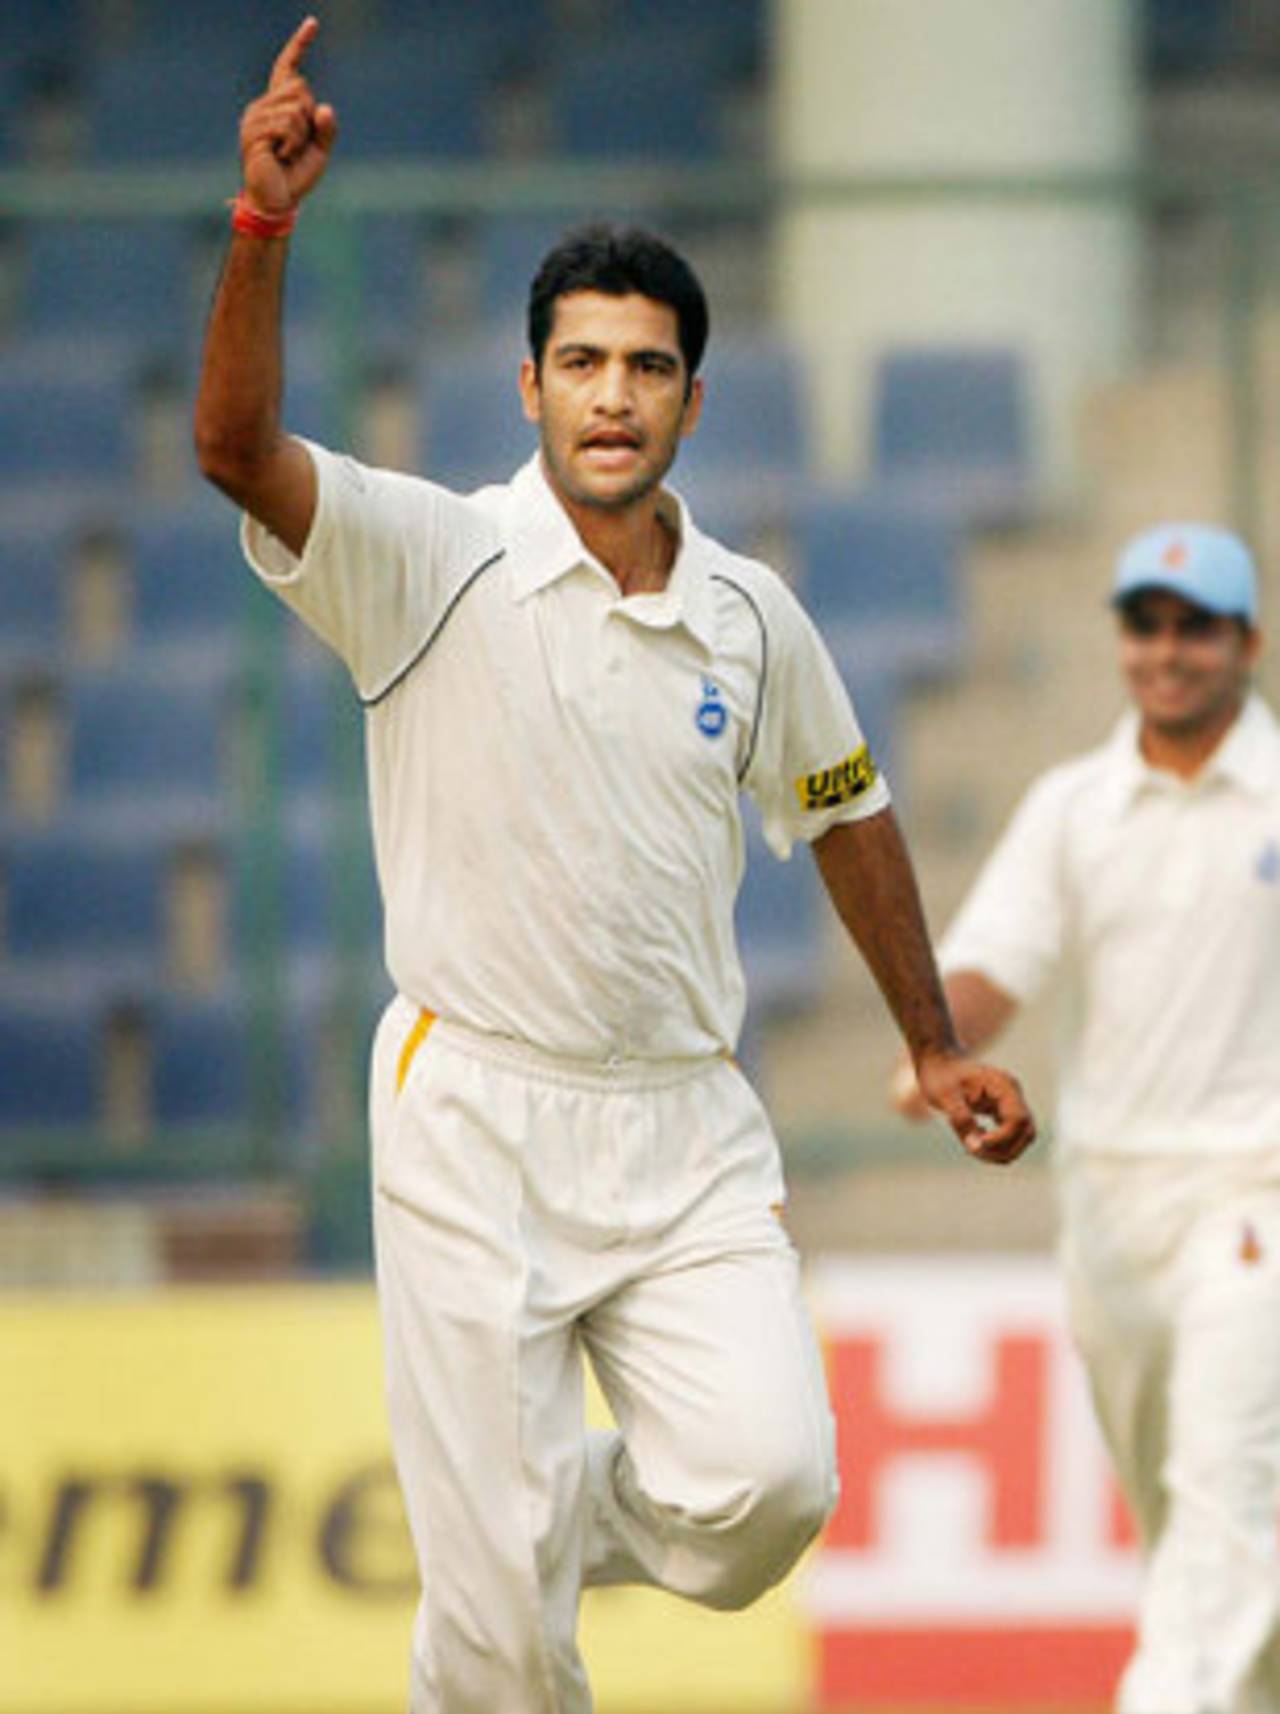 Amit Bhandari took 2 for 22 on the first day against Rajasthan, Delhi v Rajasthan, Ranji Trophy Super League, Group A, 1st round, 1st day, Delhi, November 4, 2007 